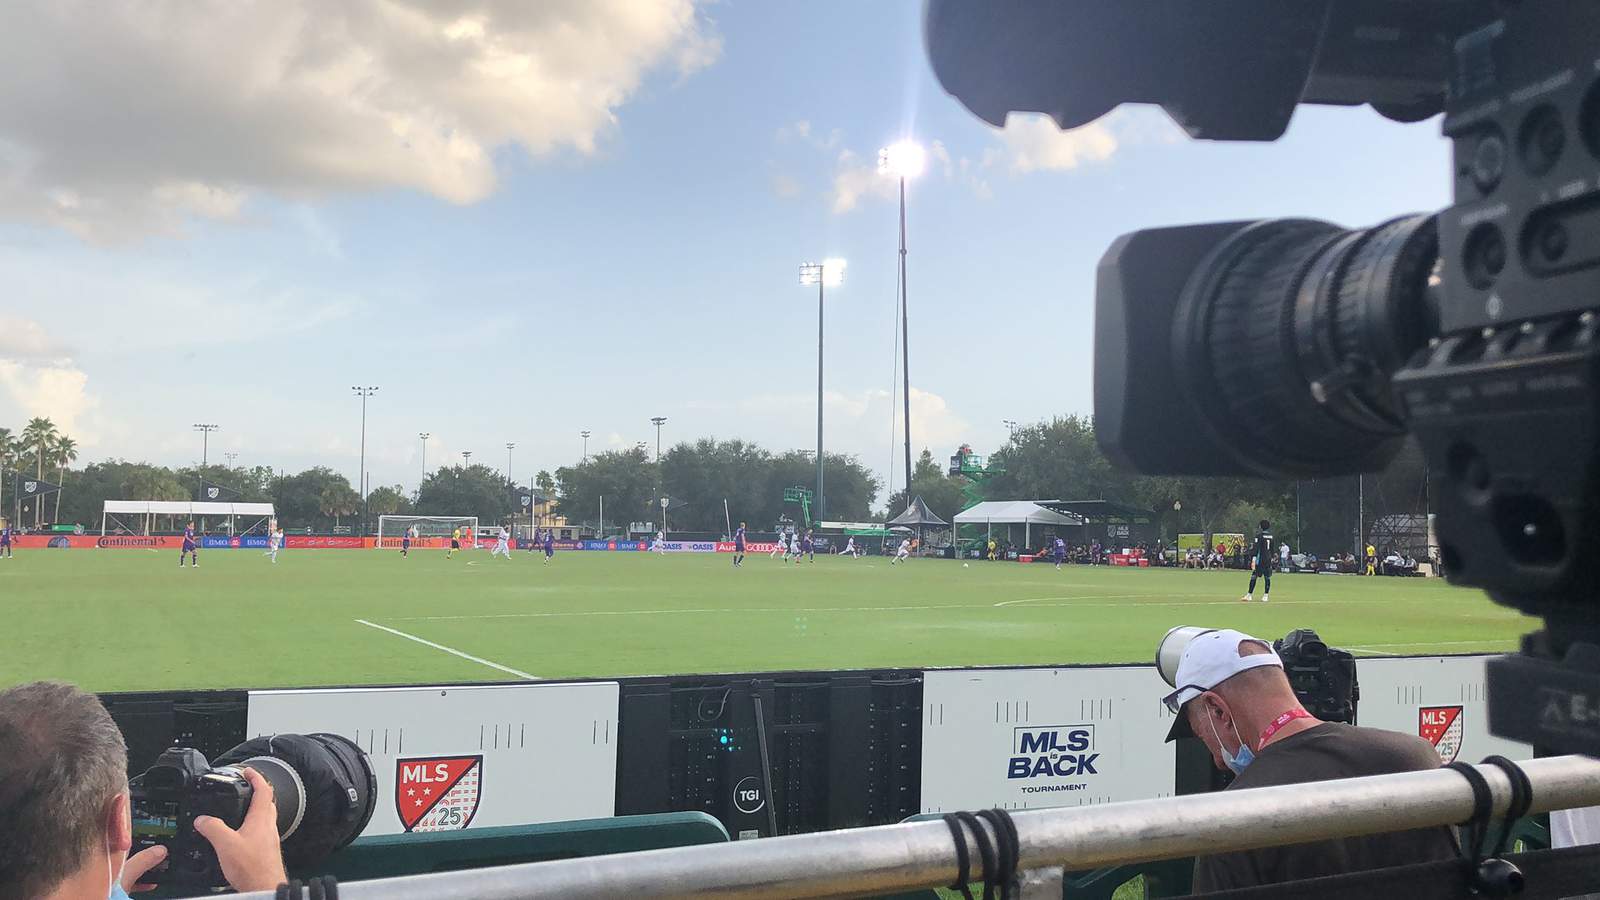 What the MLS is Back tournament was like from a journalist who covered it